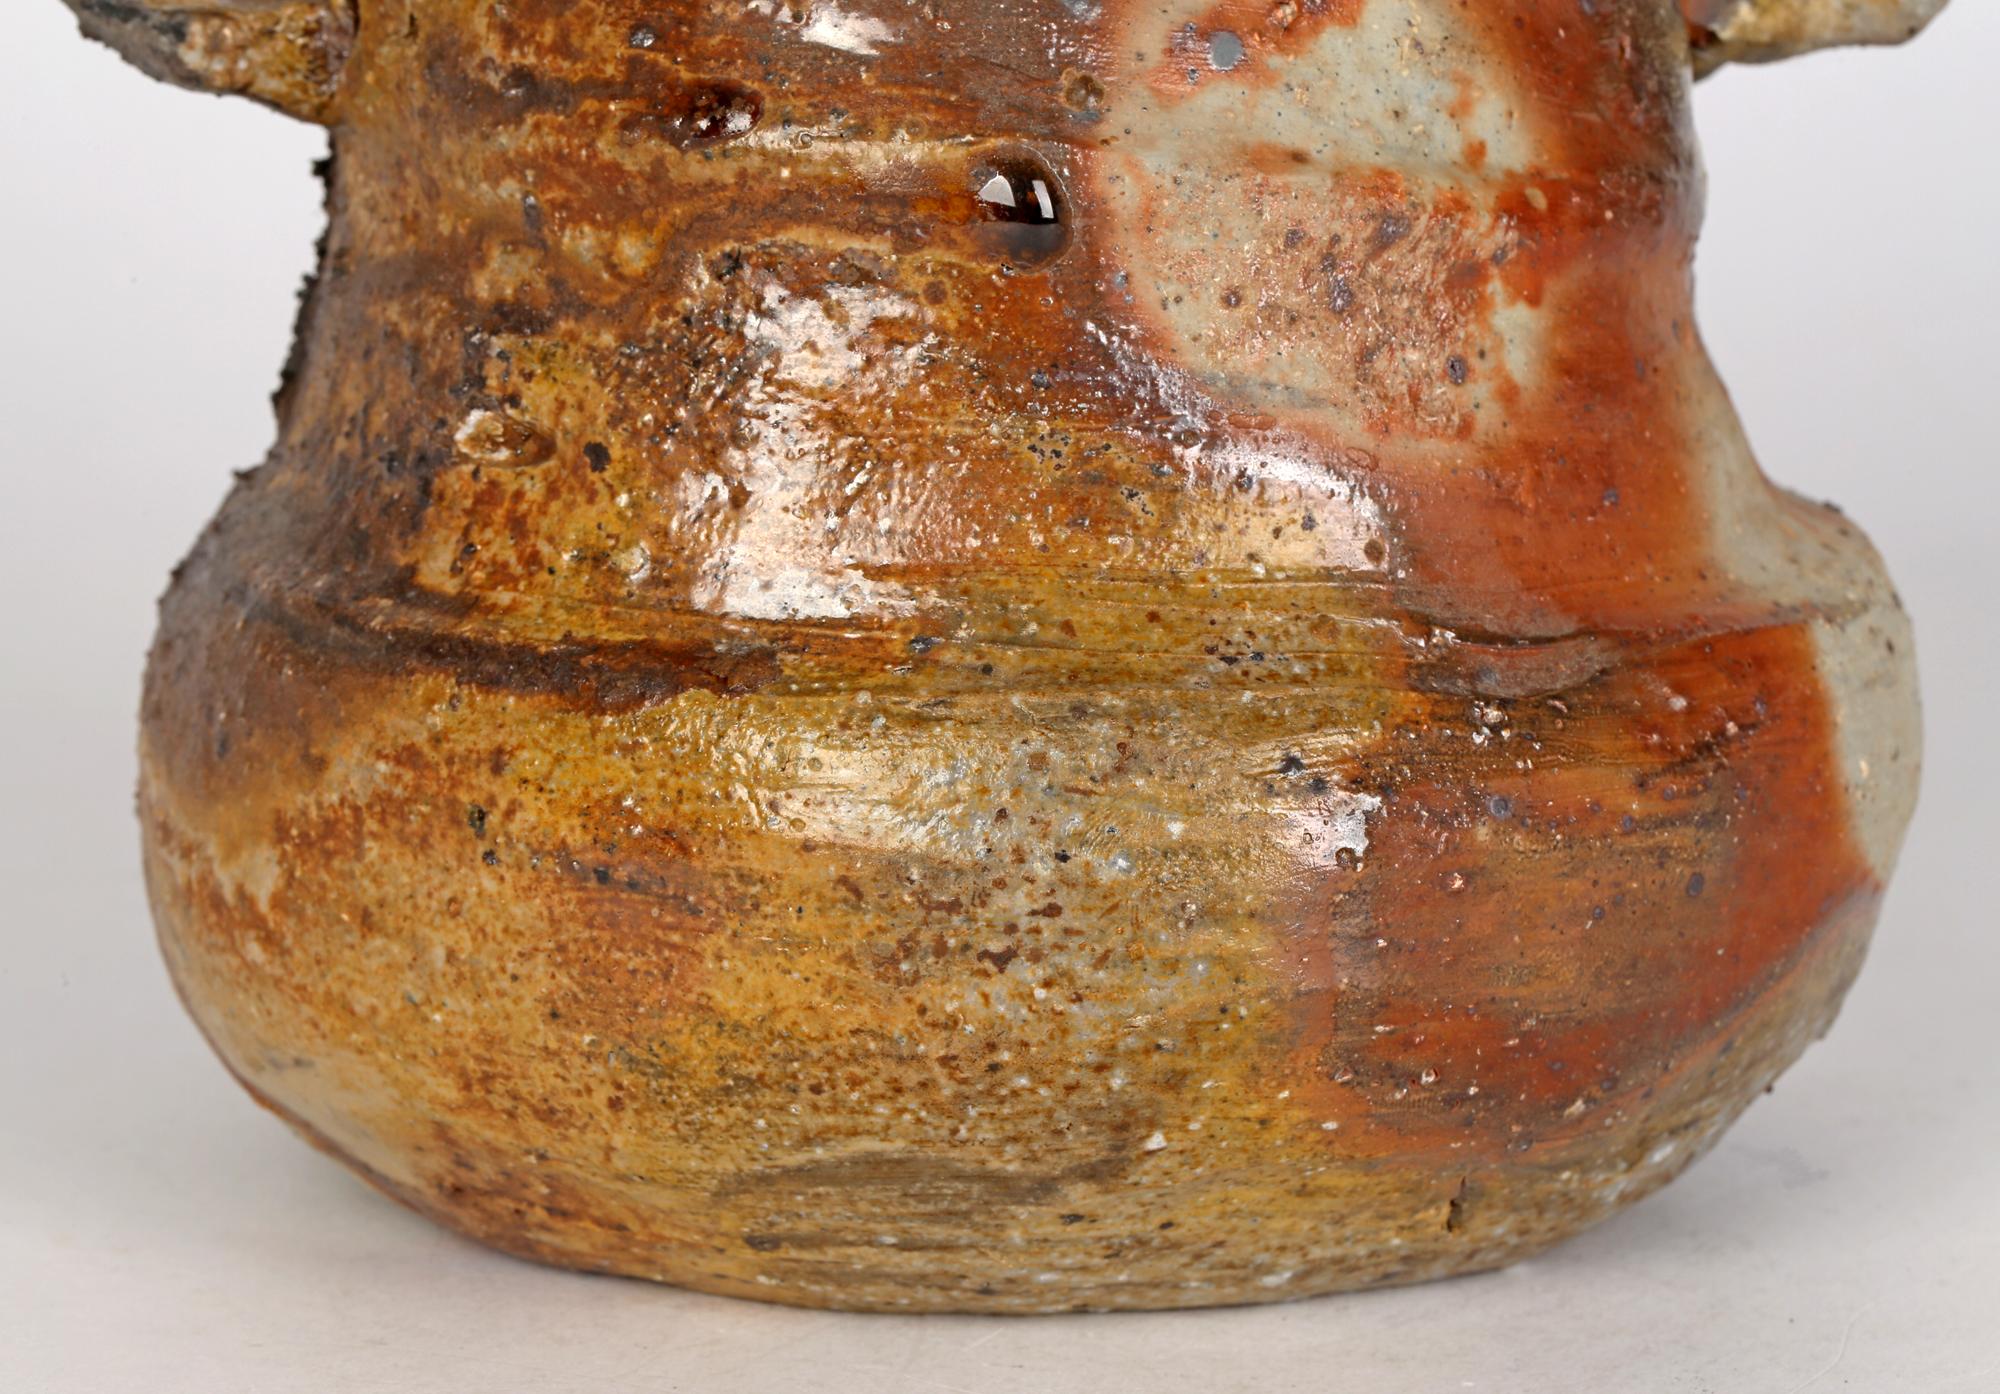 A truly wonderful design piece, and one of my favourite pieces, is this hand-built wood fired twin handled studio pottery vase of sculptural form dating from the 20th century. The stoneware vase is heavily potted with what appears to be layers of